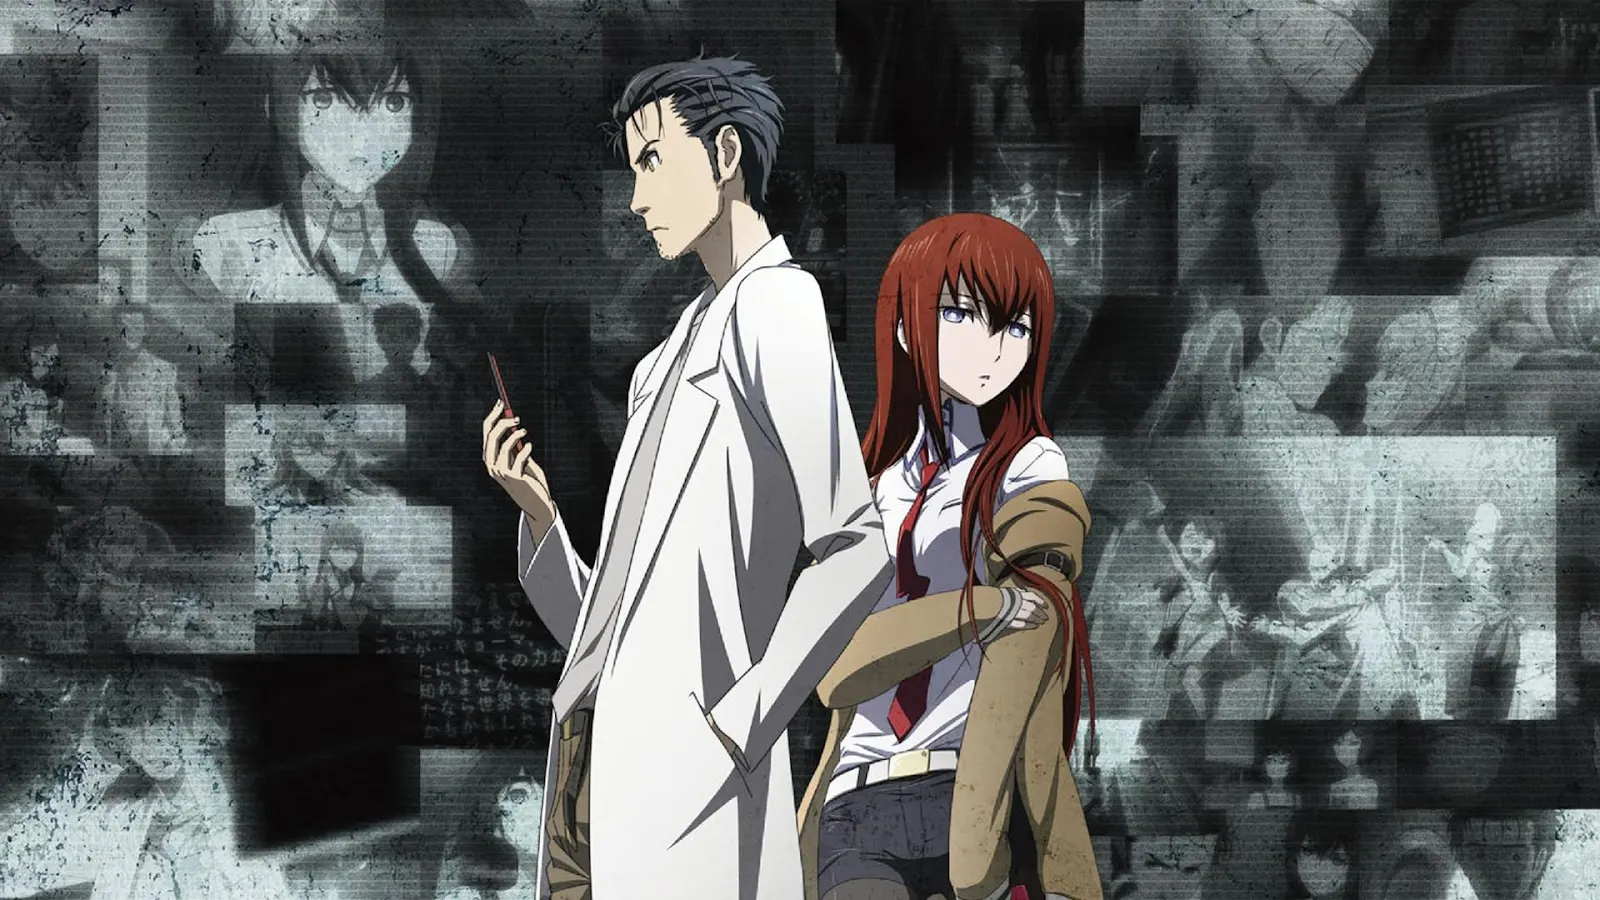 Left: Rintaro Okabe, self-titled mad scientist. Right: Makise Kurisu: actual scientist. Together: best anime couple. Fight me.